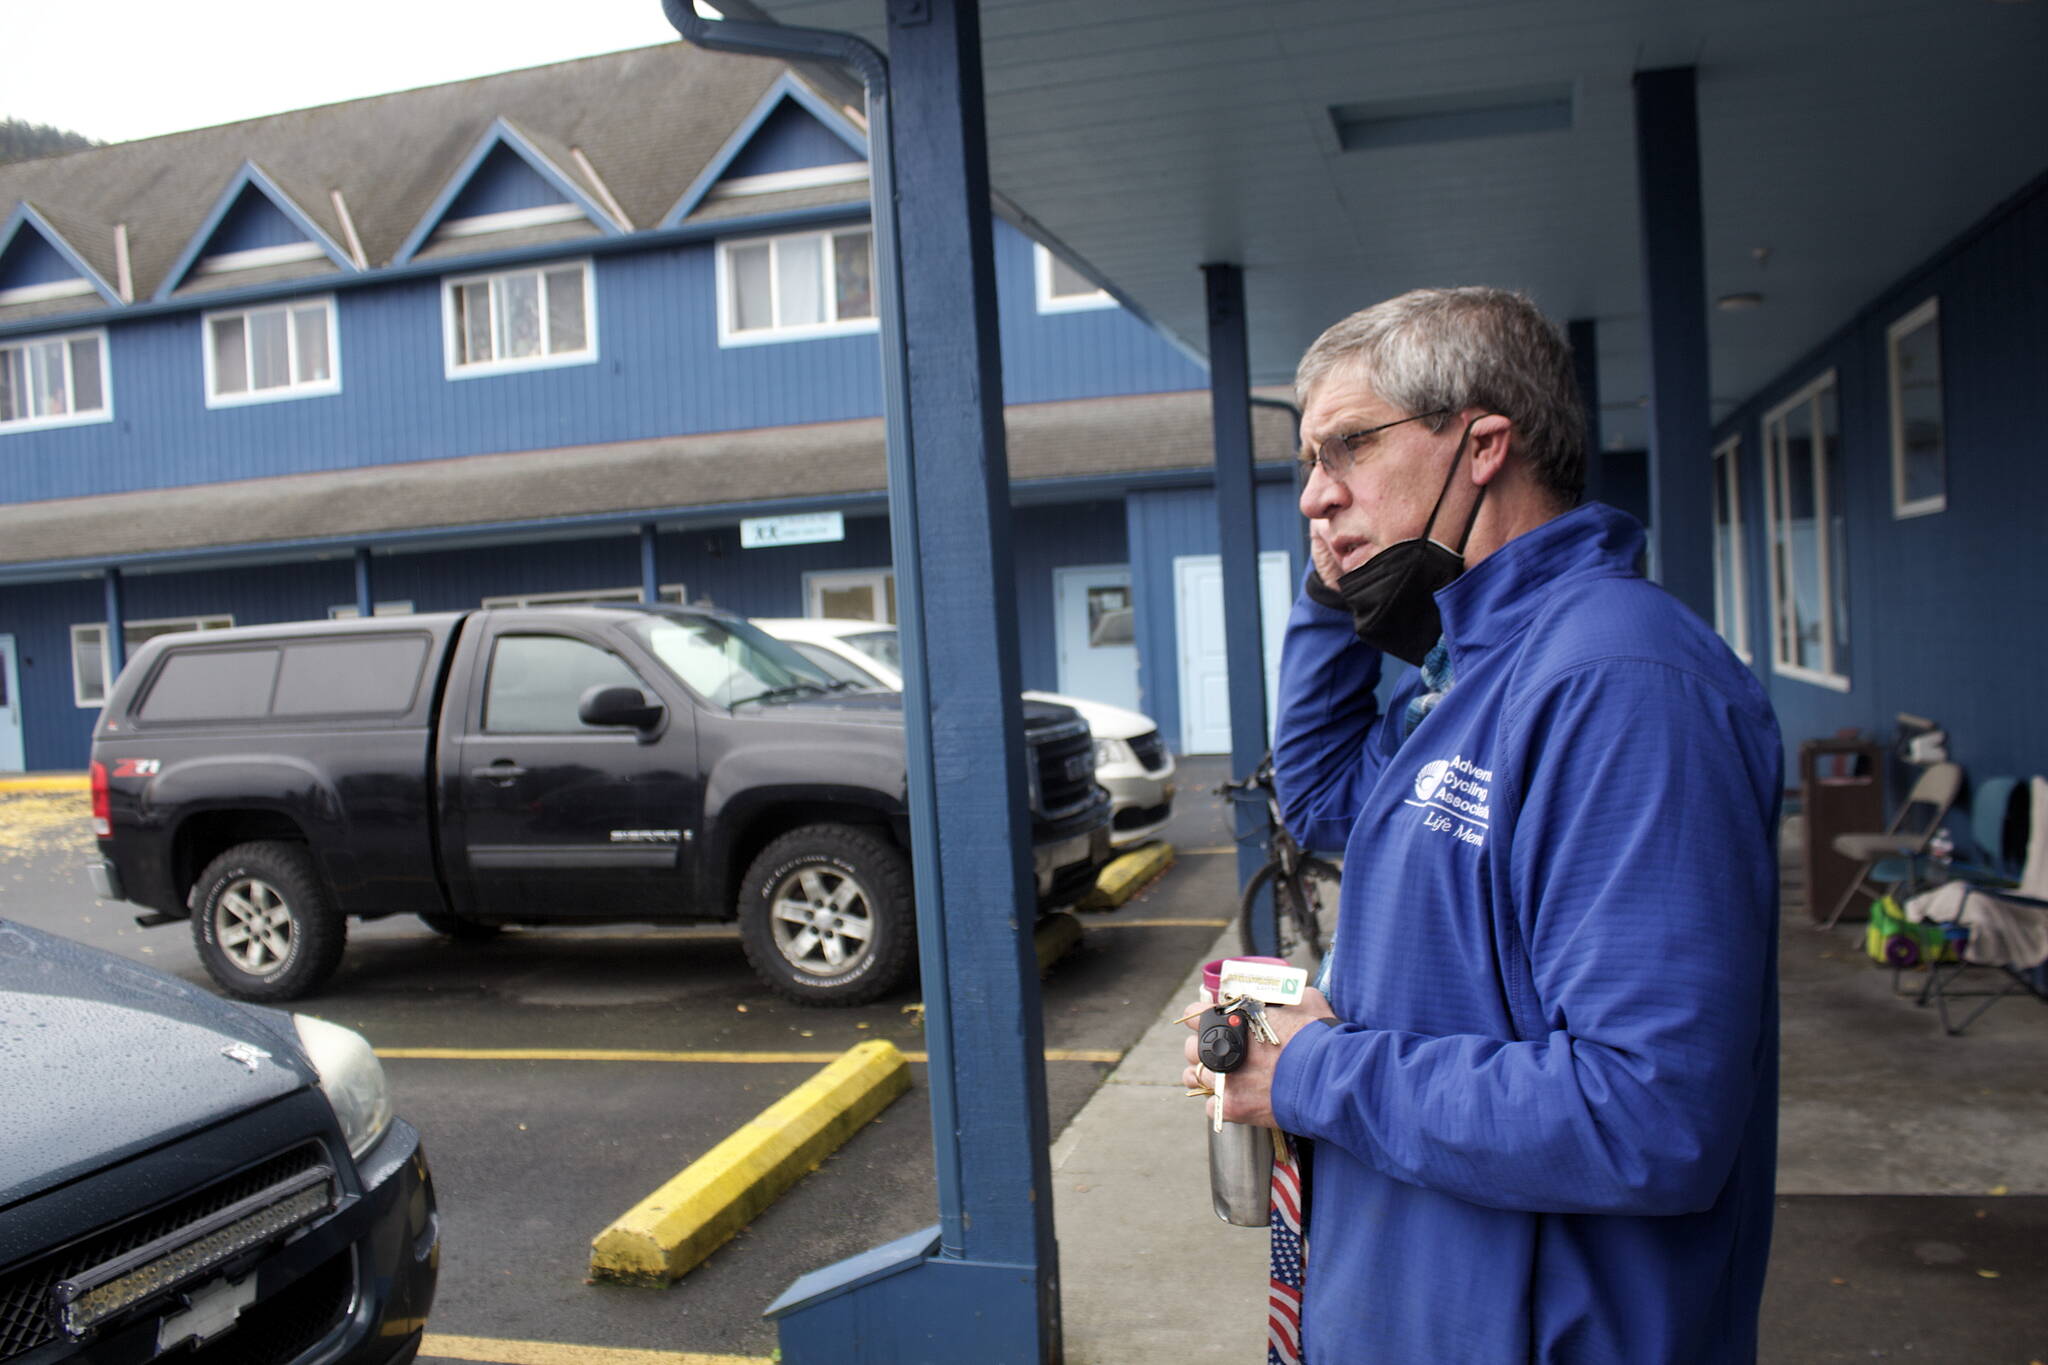 Dave Ringle, executive director of the Society of St. Vincent de Paul in Juneau, removes a face mask after exiting transitional housing Wednesday at the organization’s complex on Teal Street, where a public open day will be part of an annual fundraiser Saturday. The complex is in the midst of various upgrades and Ringle said the fundraiser is intended to help both the projects and provide direct aid to residents. (Mark Sabbatini / Juneau Empire)